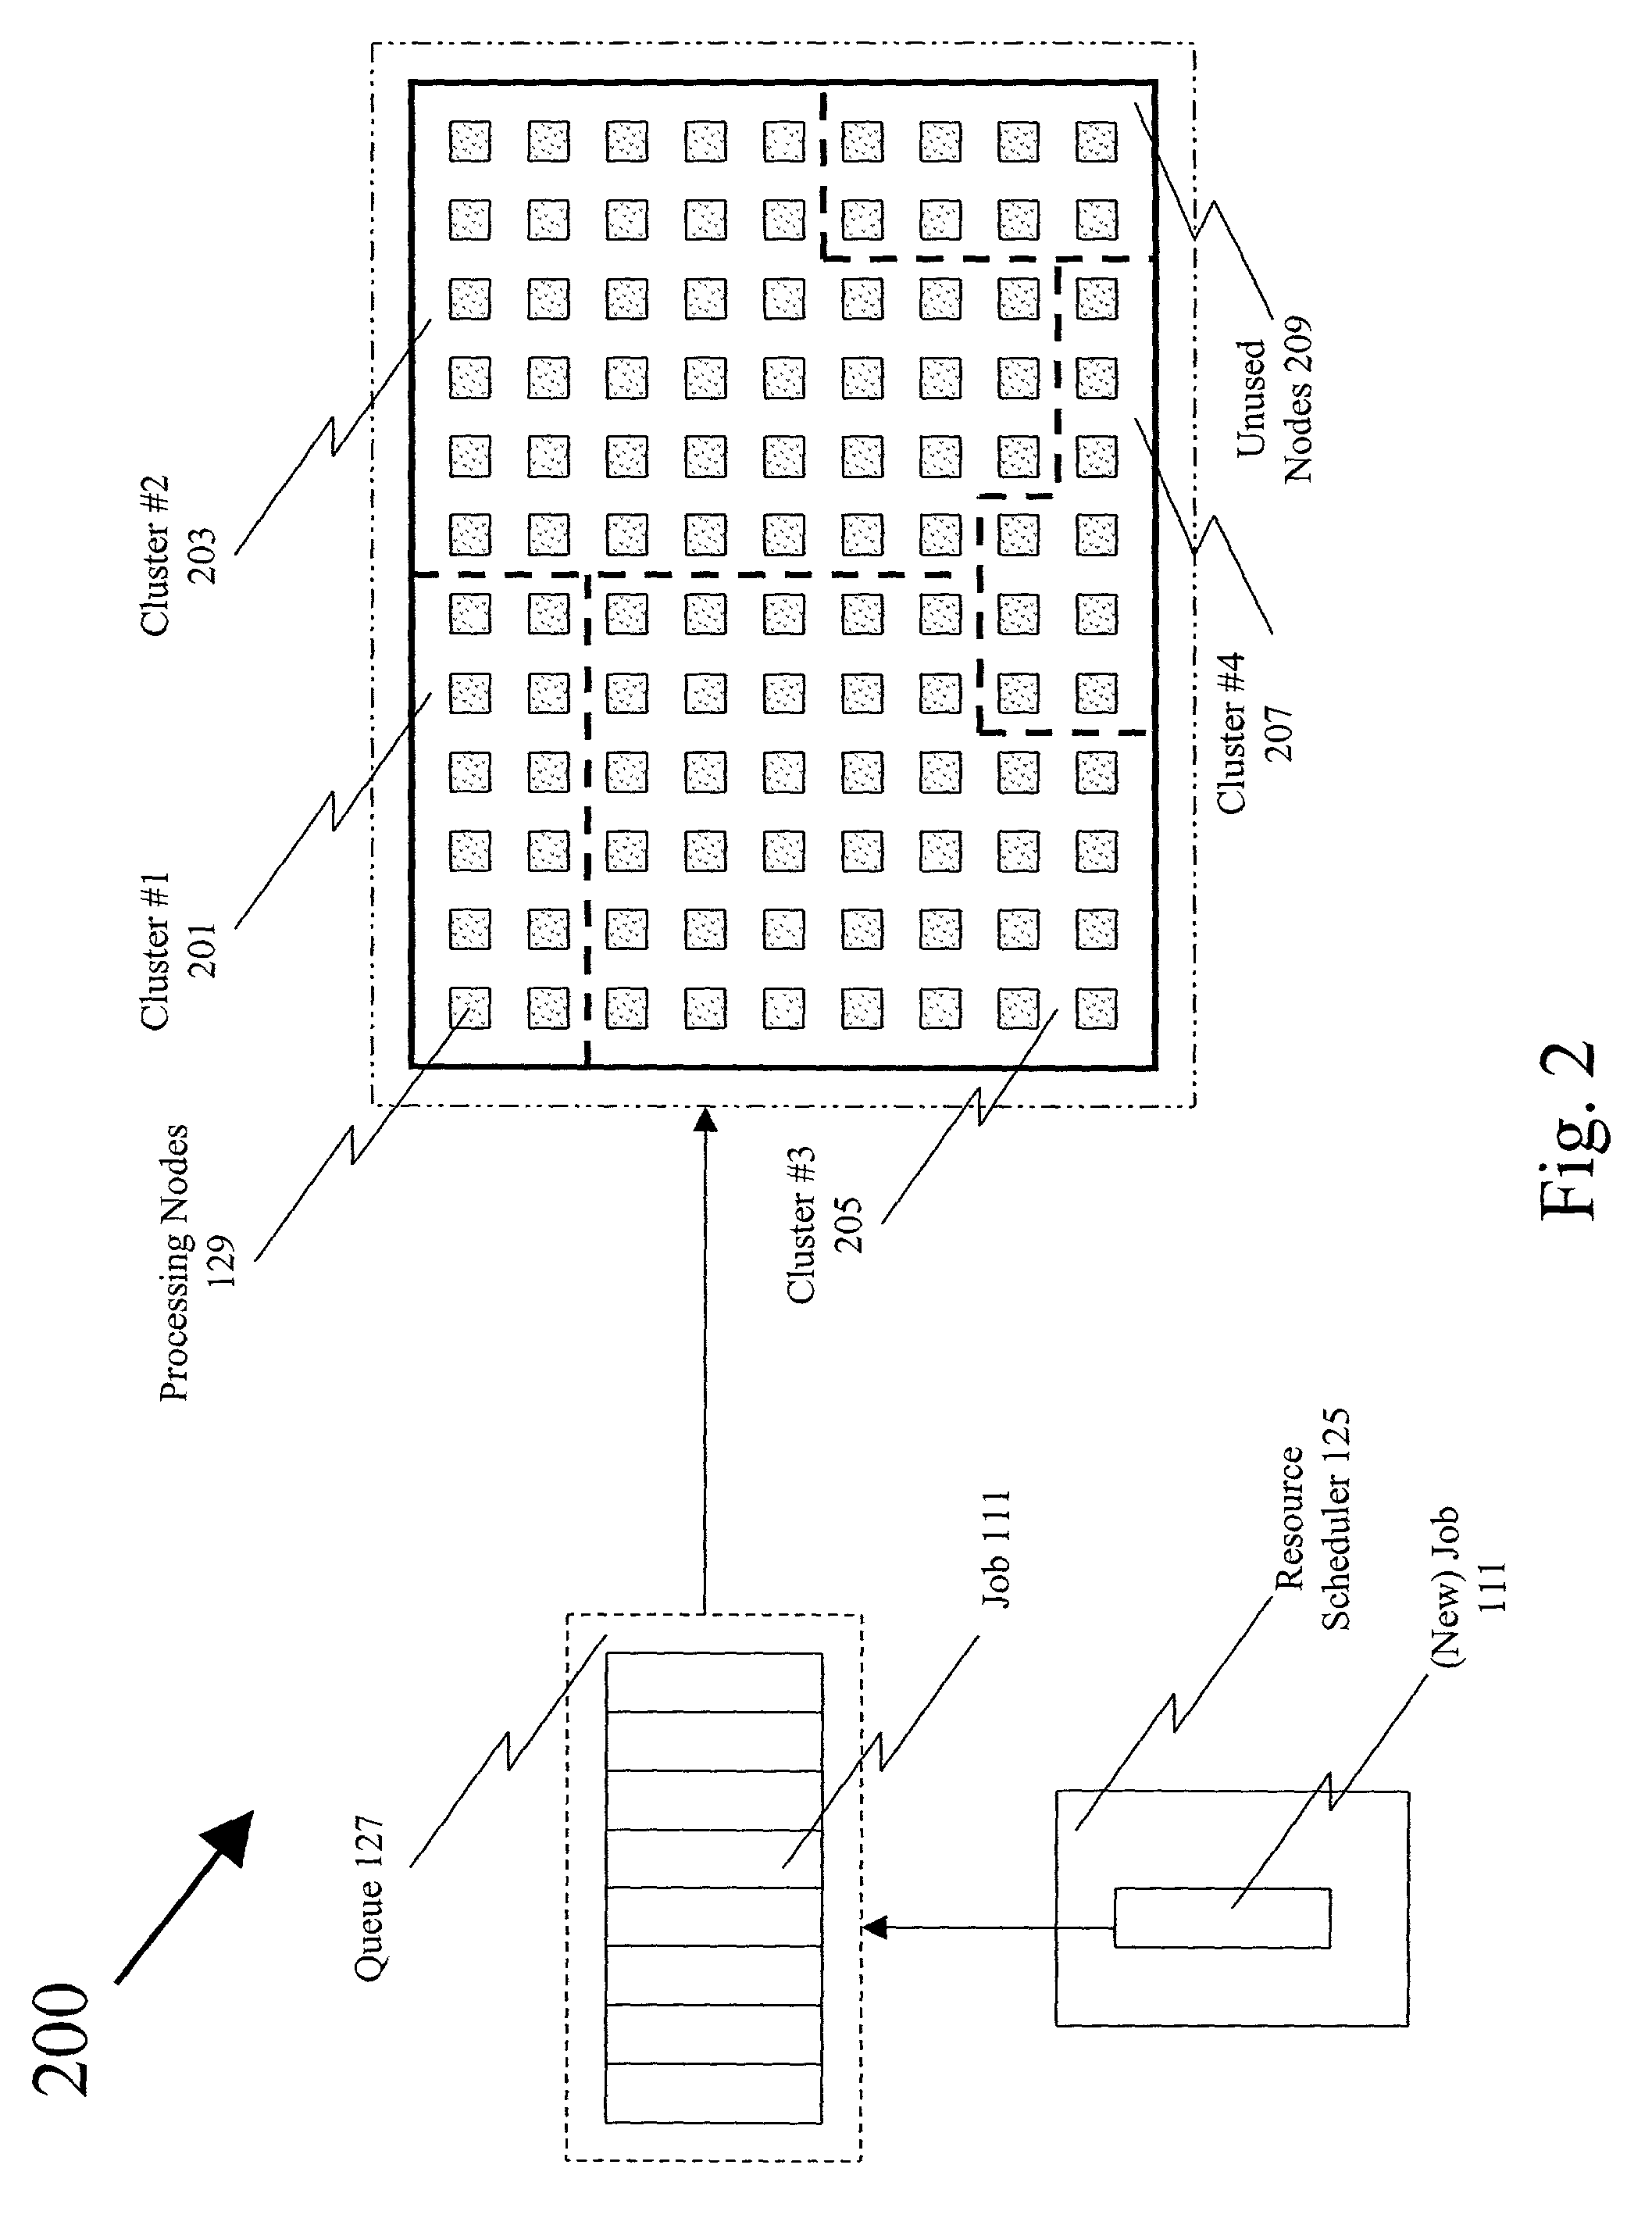 Dynamically allocated cluster system